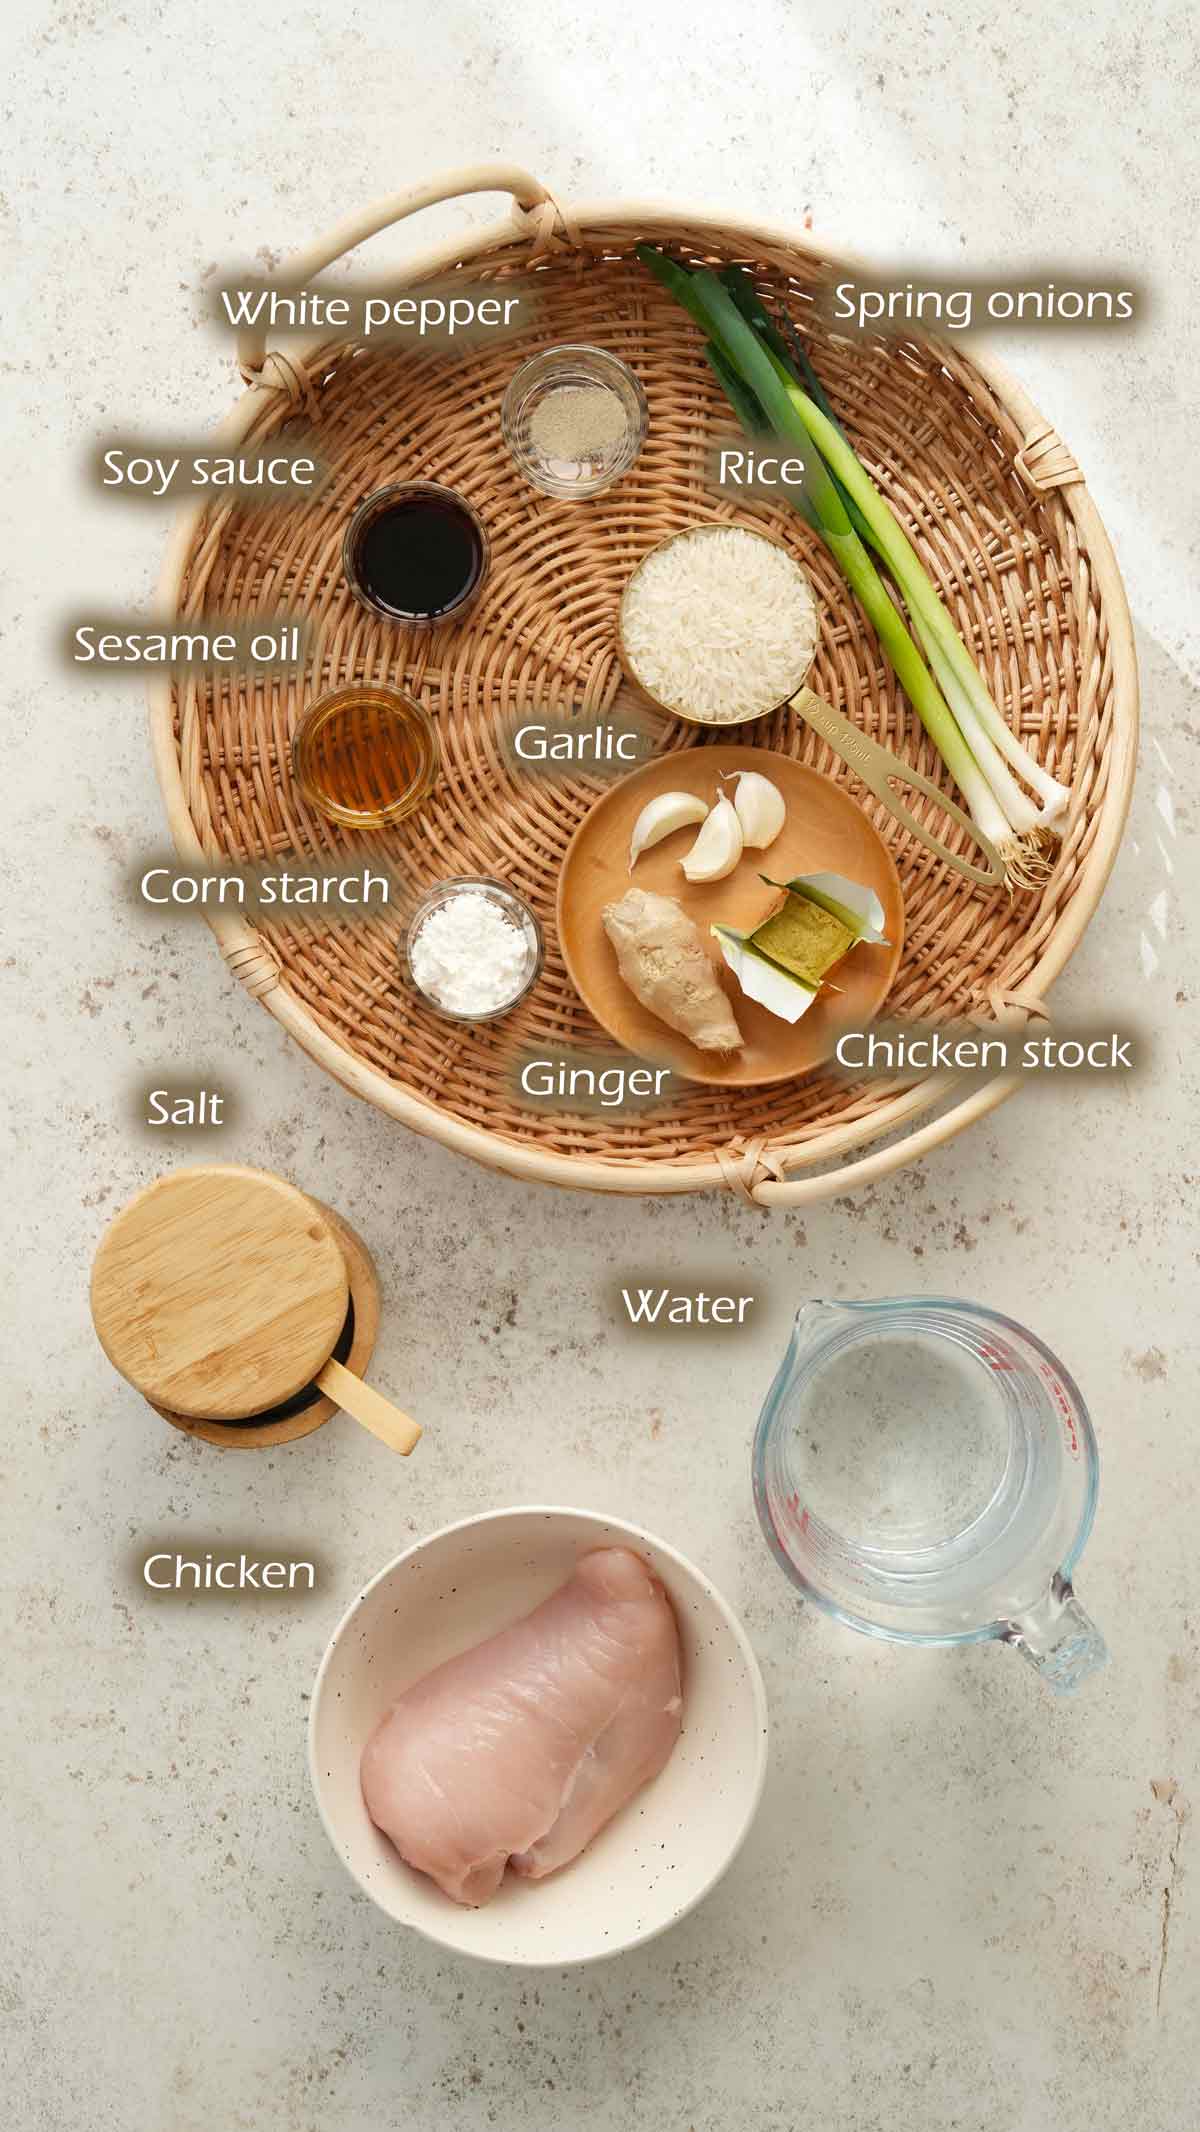 Labelled ingredients displayed on the white table. 